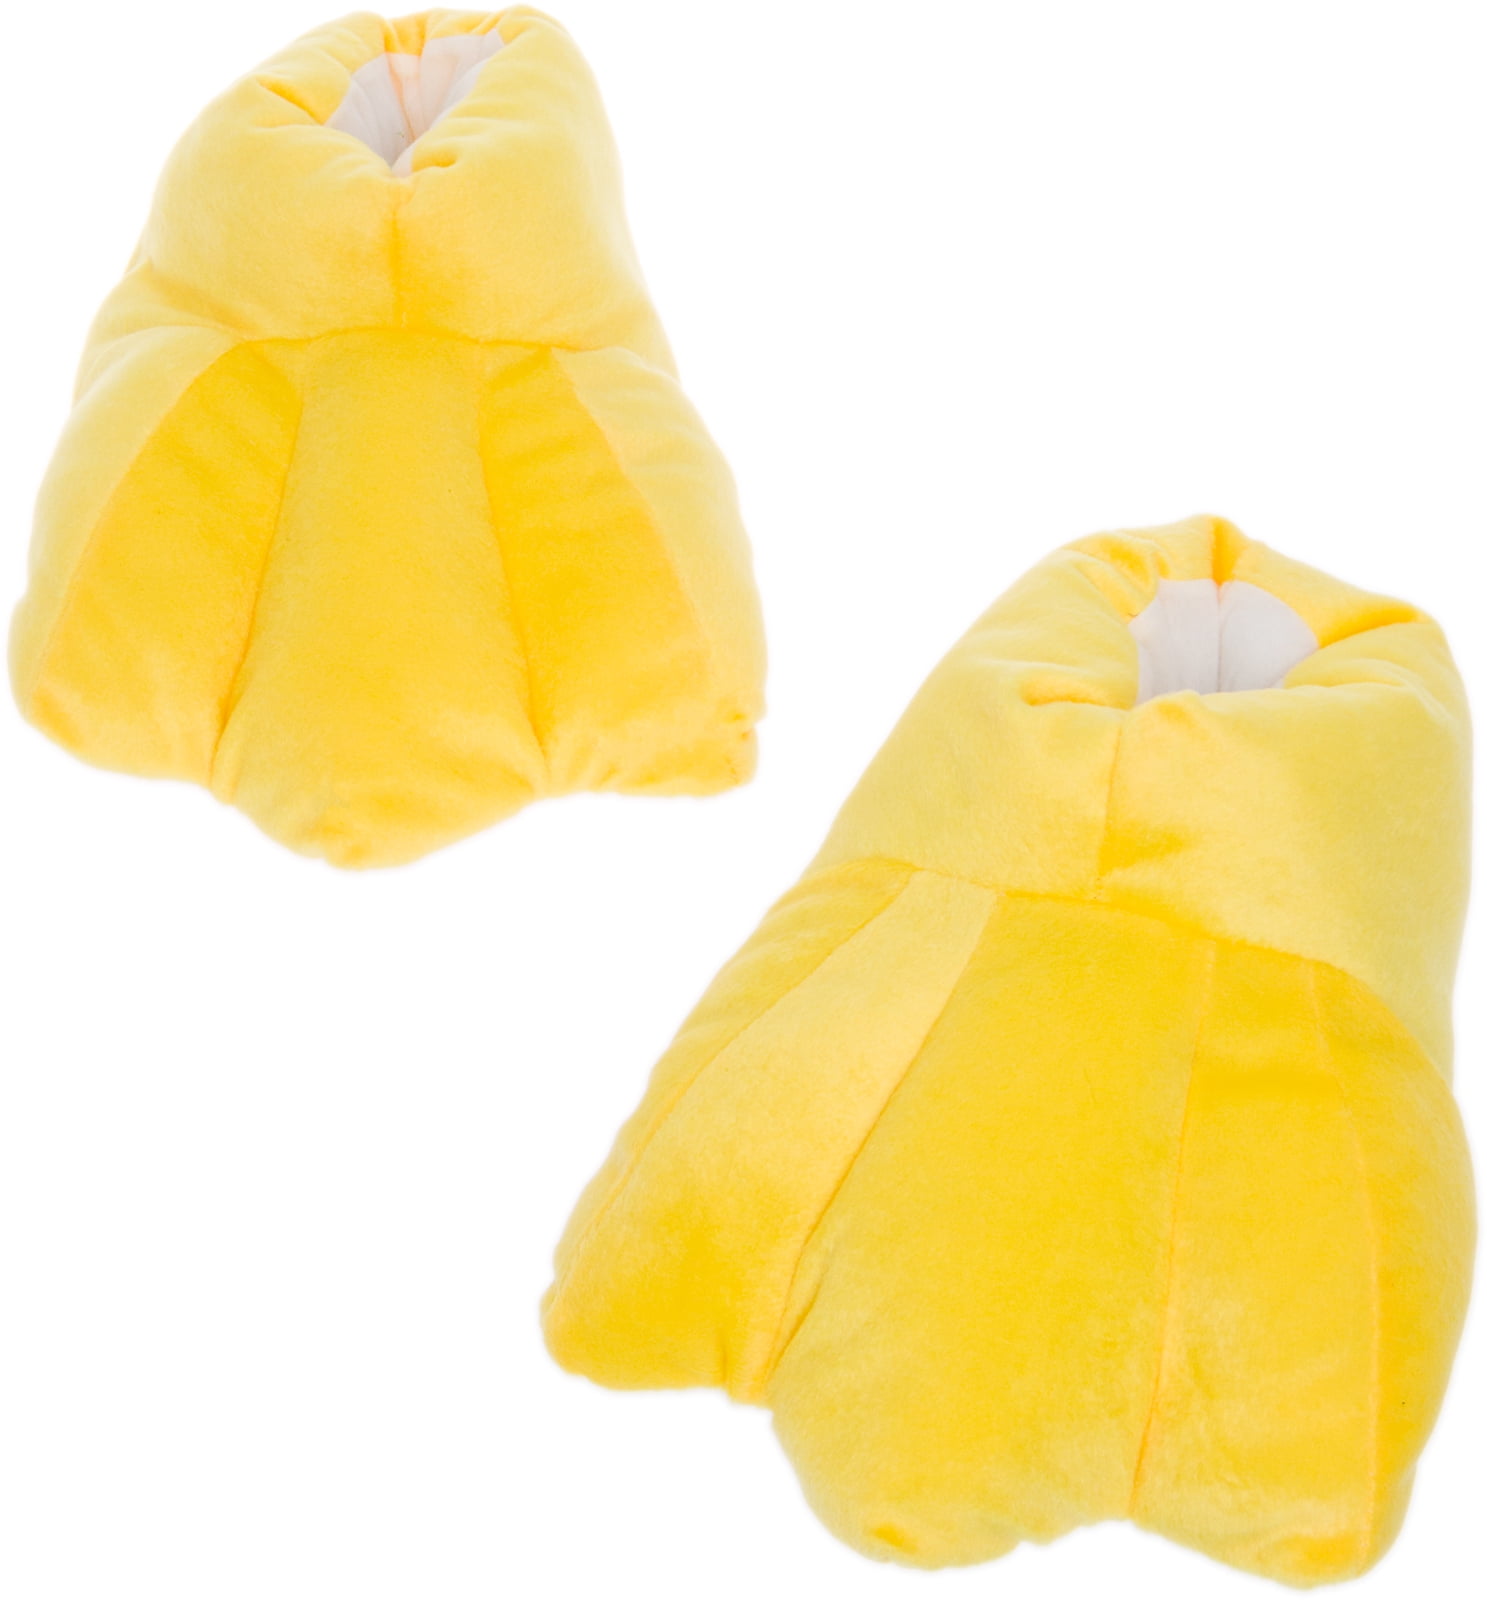 Silver Lilly Duck Feet Slippers - Plush Animal Slippers Novelty House Shoe  (Yellow, Large) 